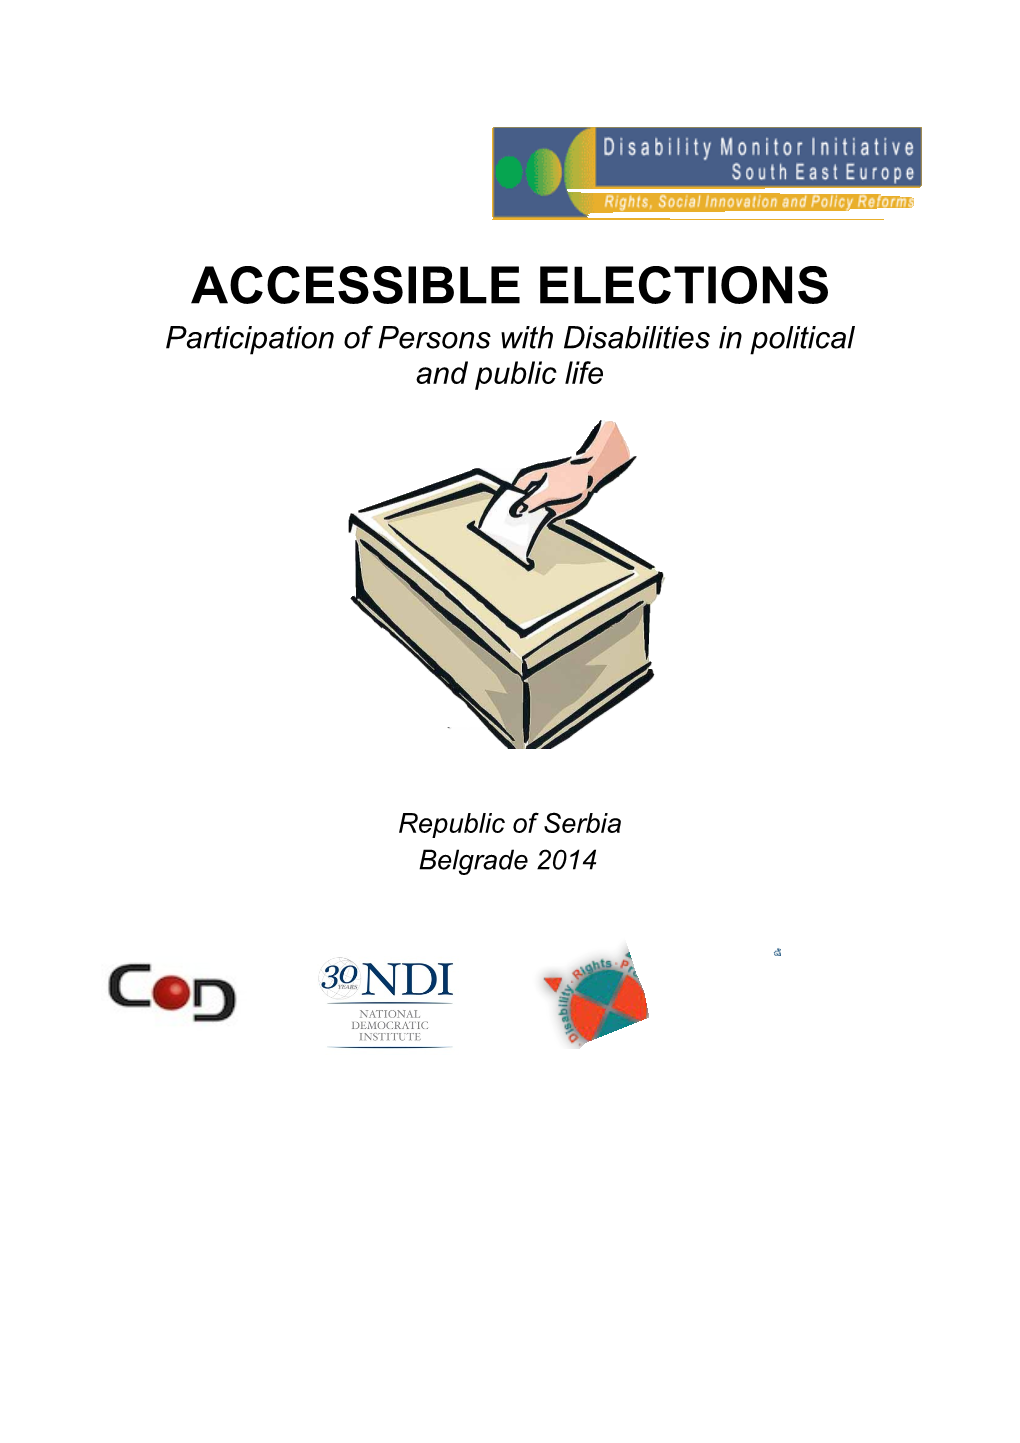 Accessible Elections